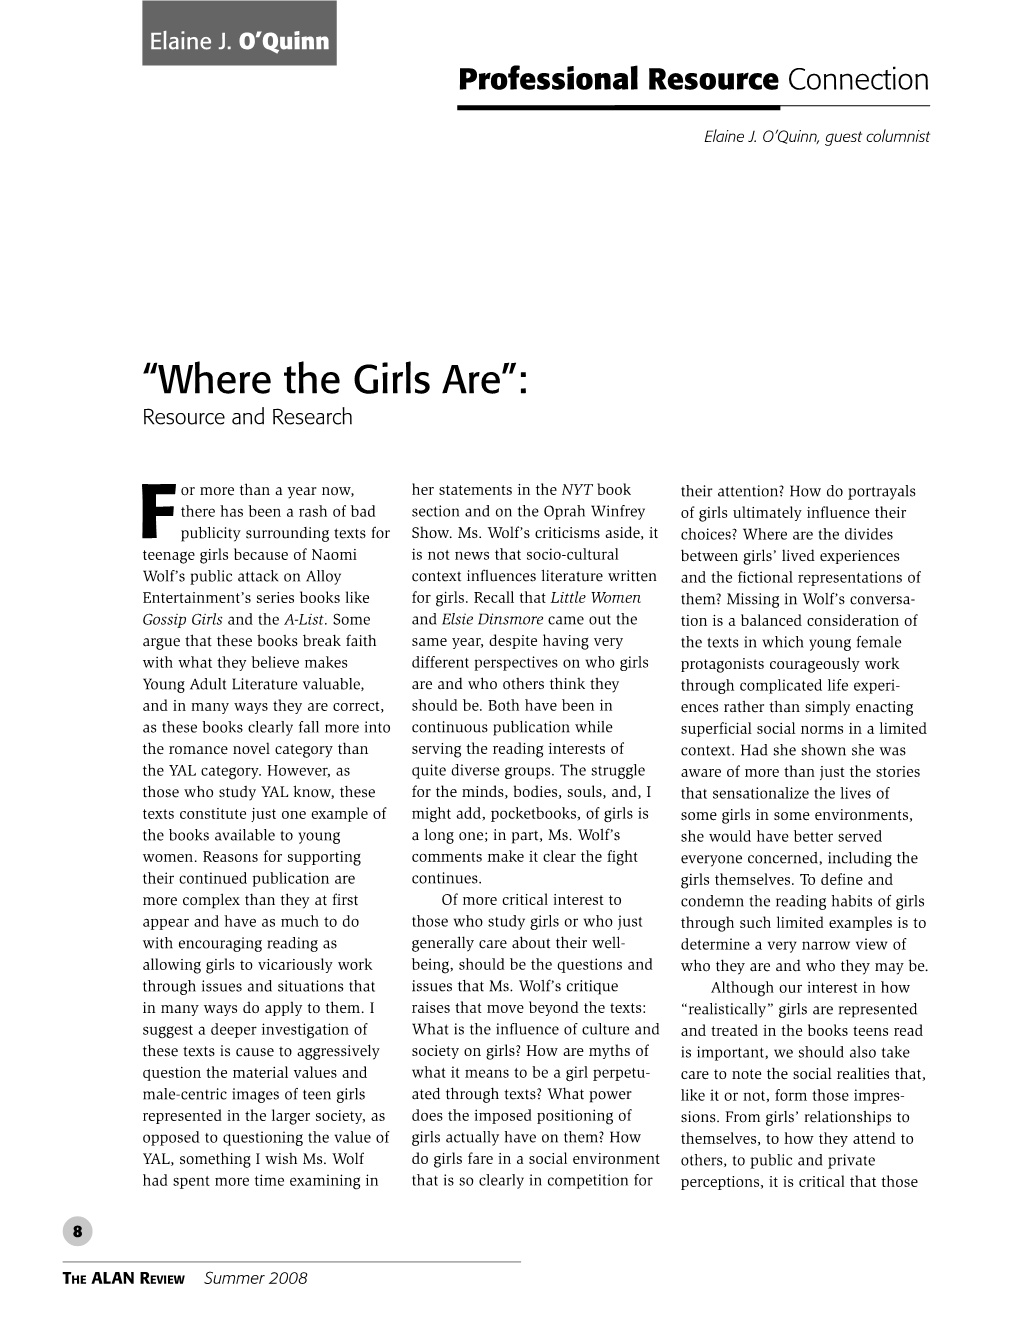 “Where the Girls Are”: Resource and Research